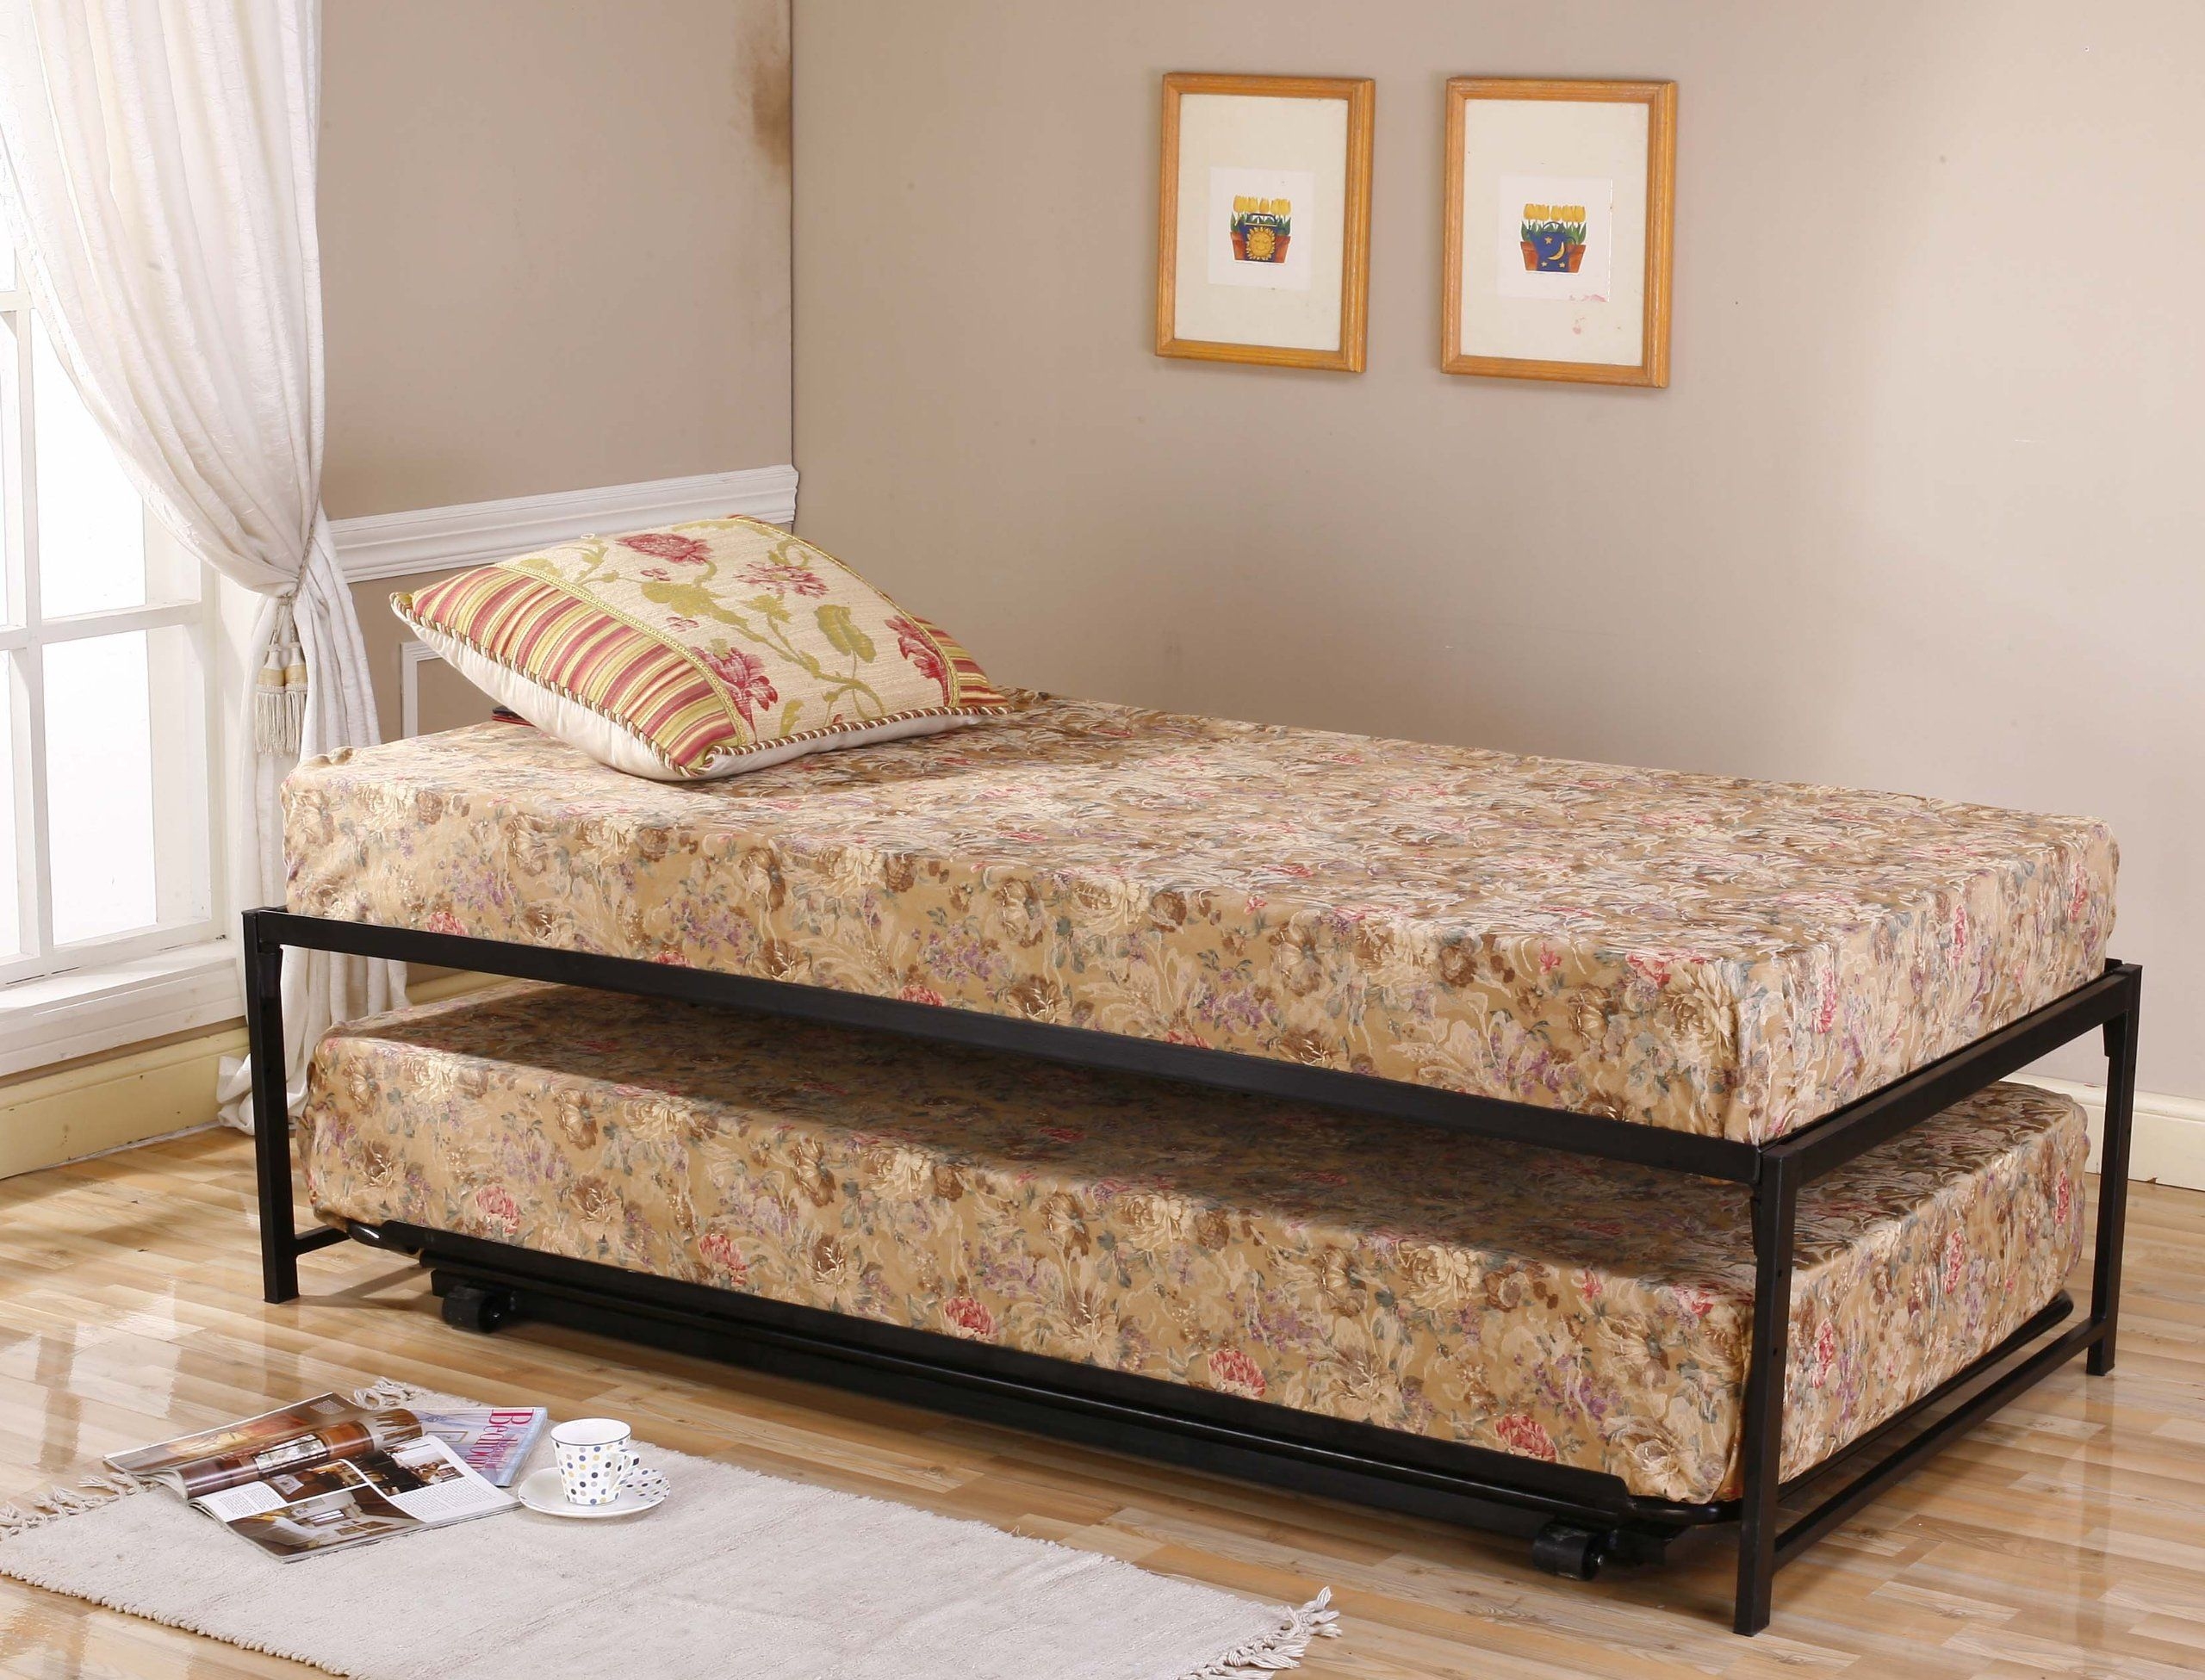 Twin Size Black Finish Metal Day Bed (Daybed) Frame & Pop Up Trundle